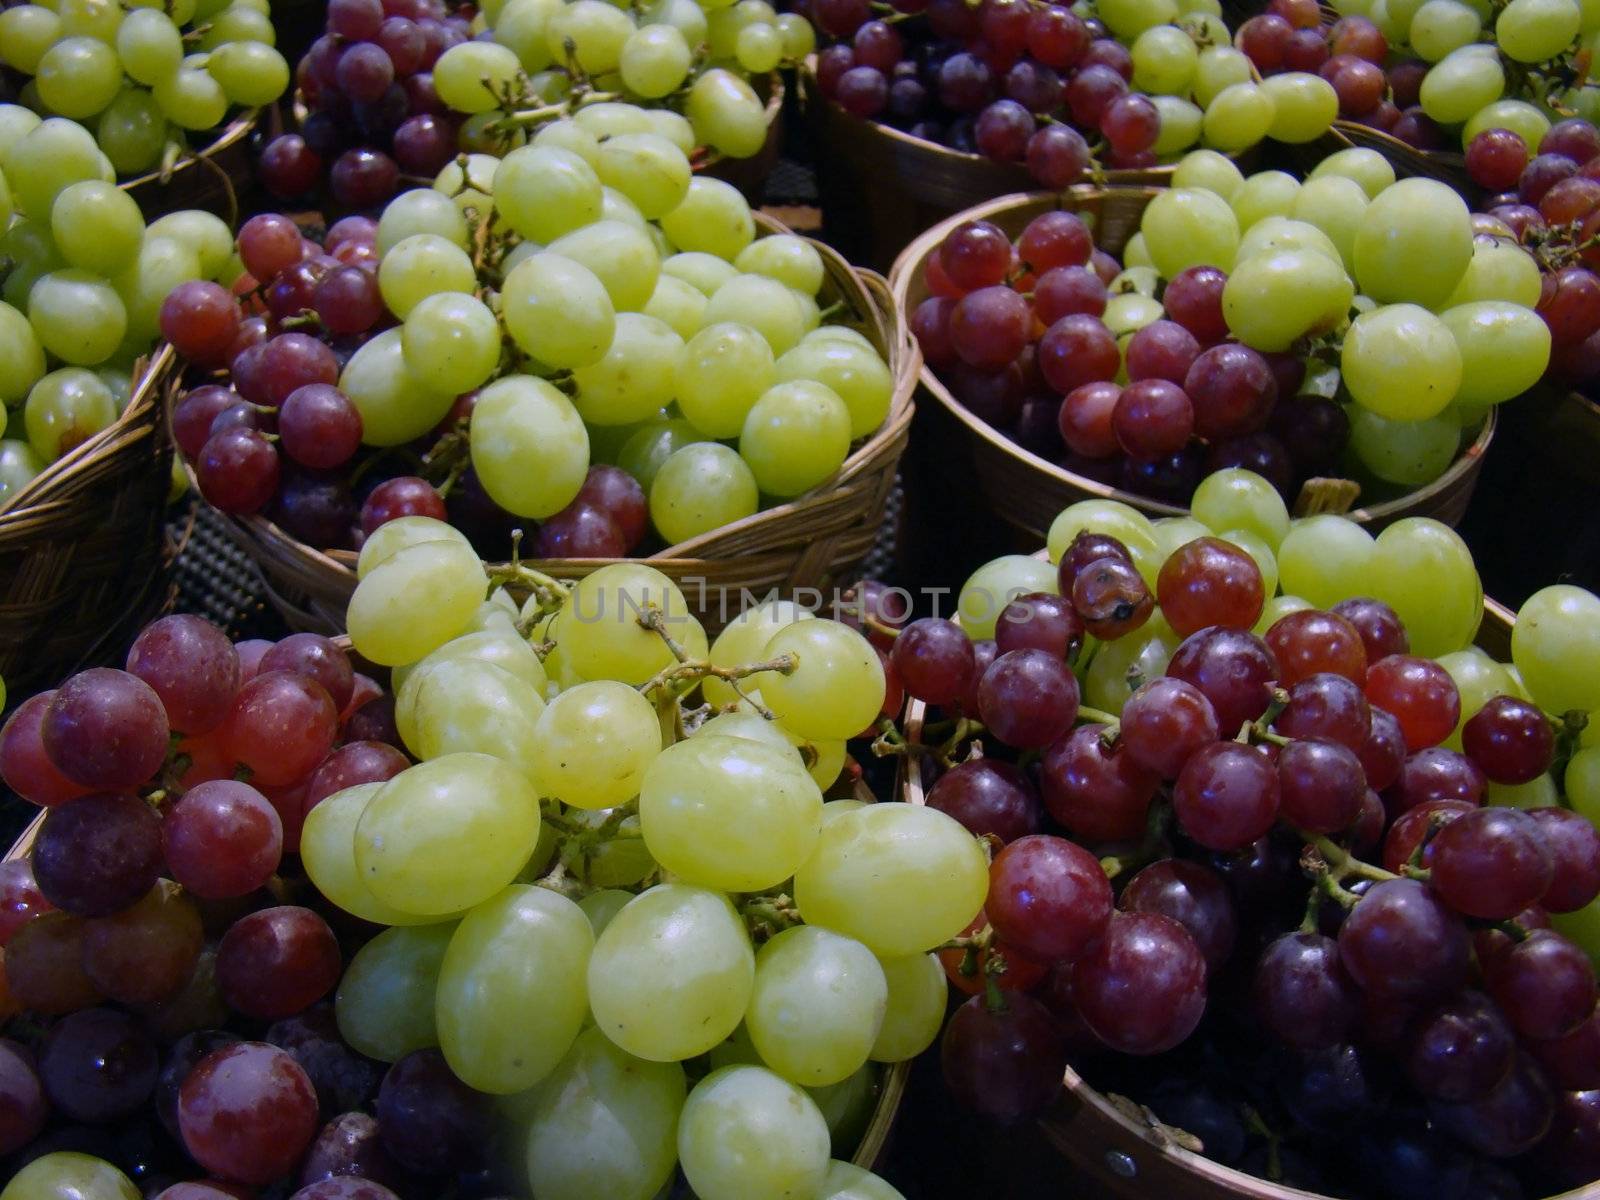 fresh fromthe market green and red grapes